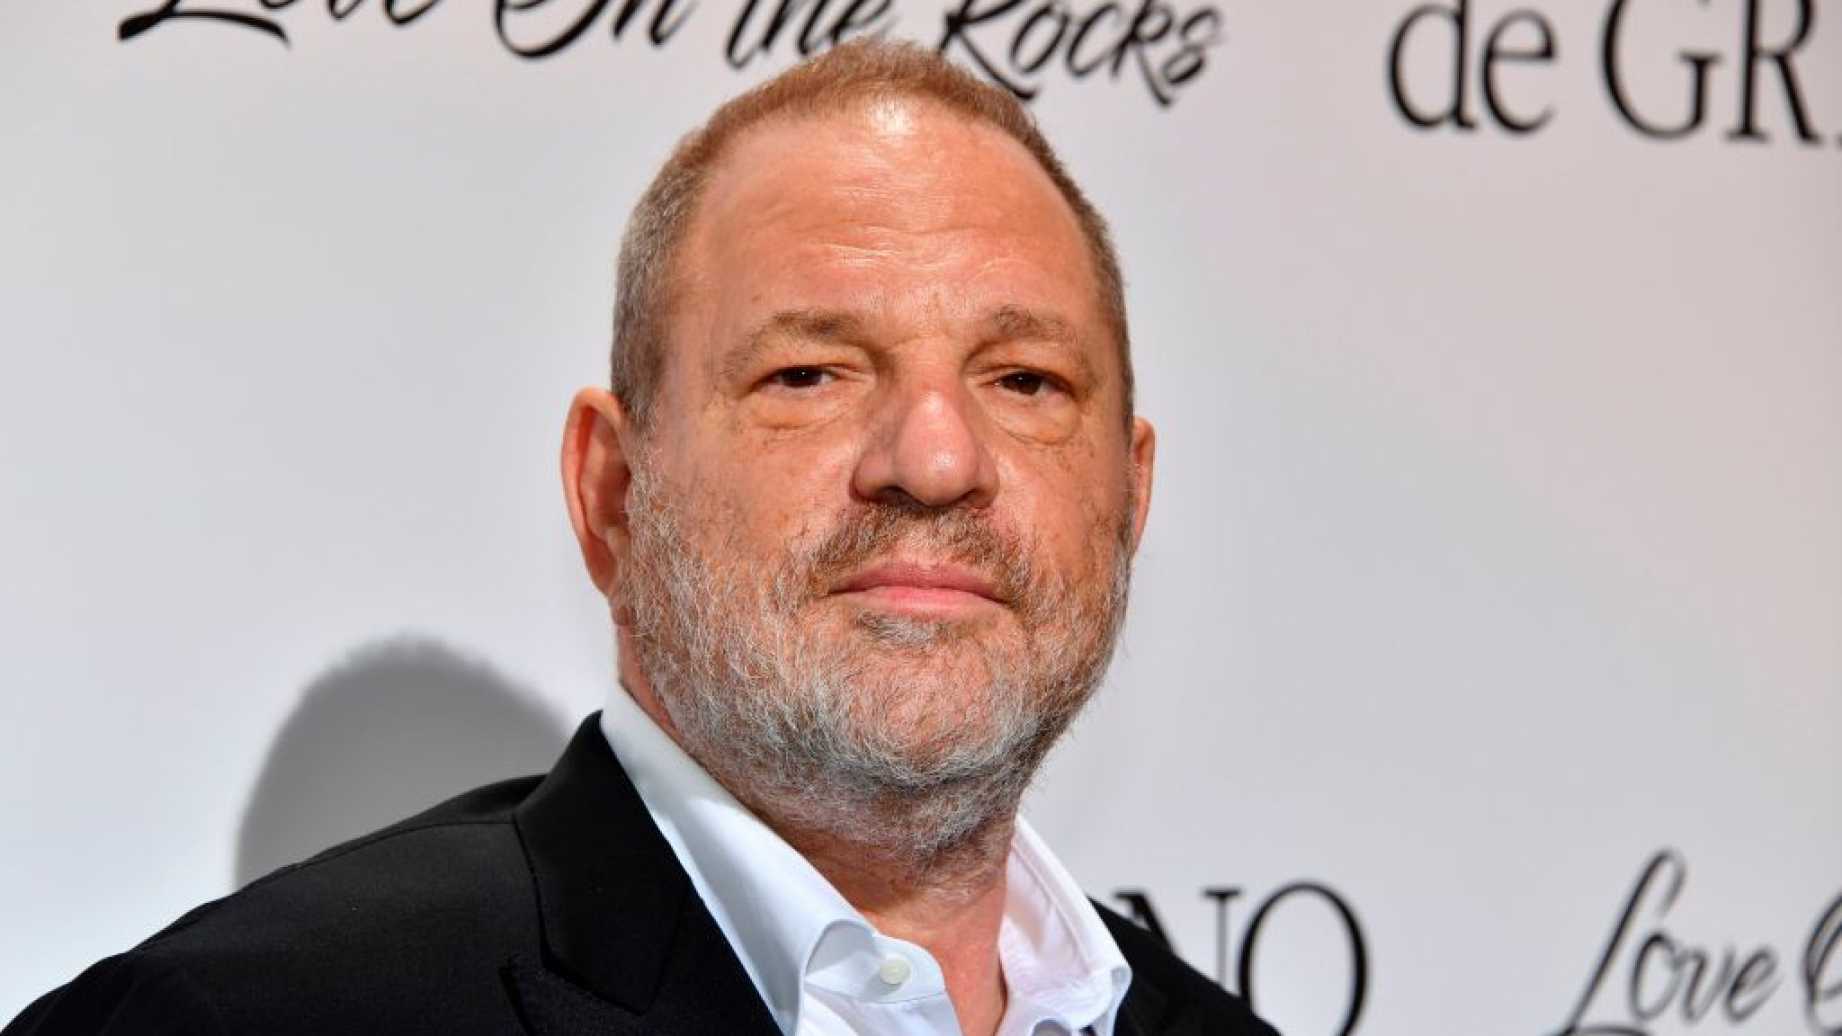 Harvey Weinstein Looses Job, Wife But Gains Lindsay Lohan’s Support